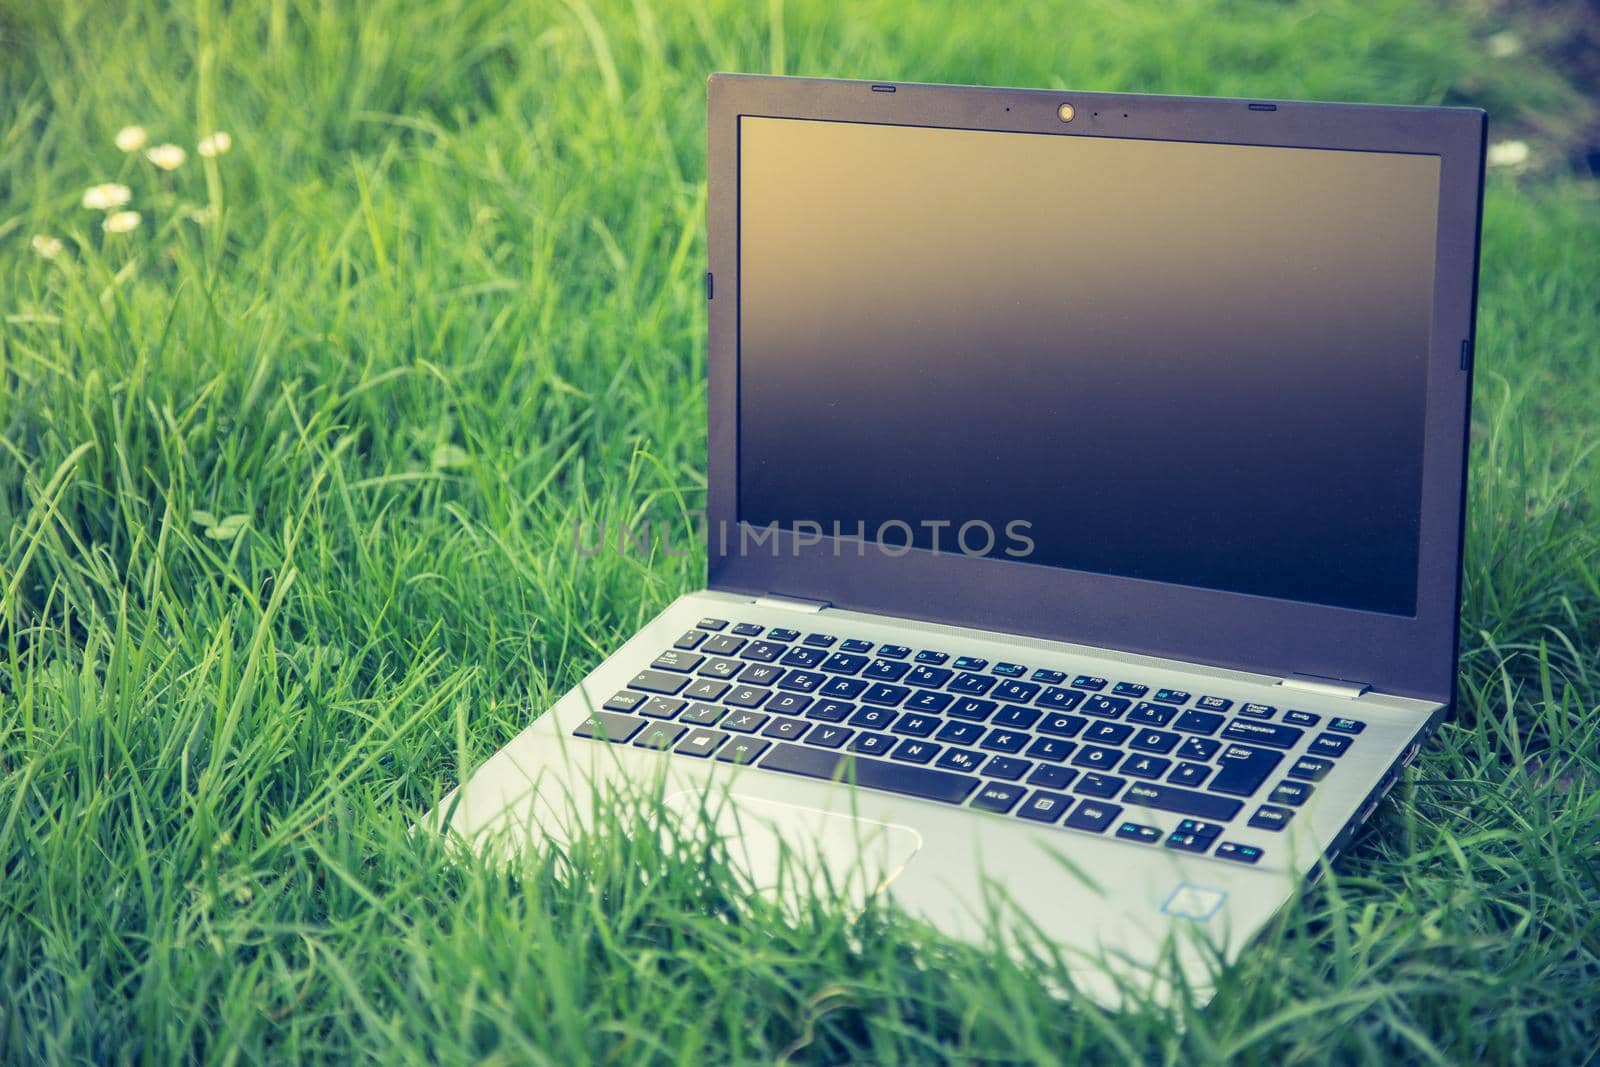 Close up of laptop lying in the green grass, studying and learning outdoors in the park